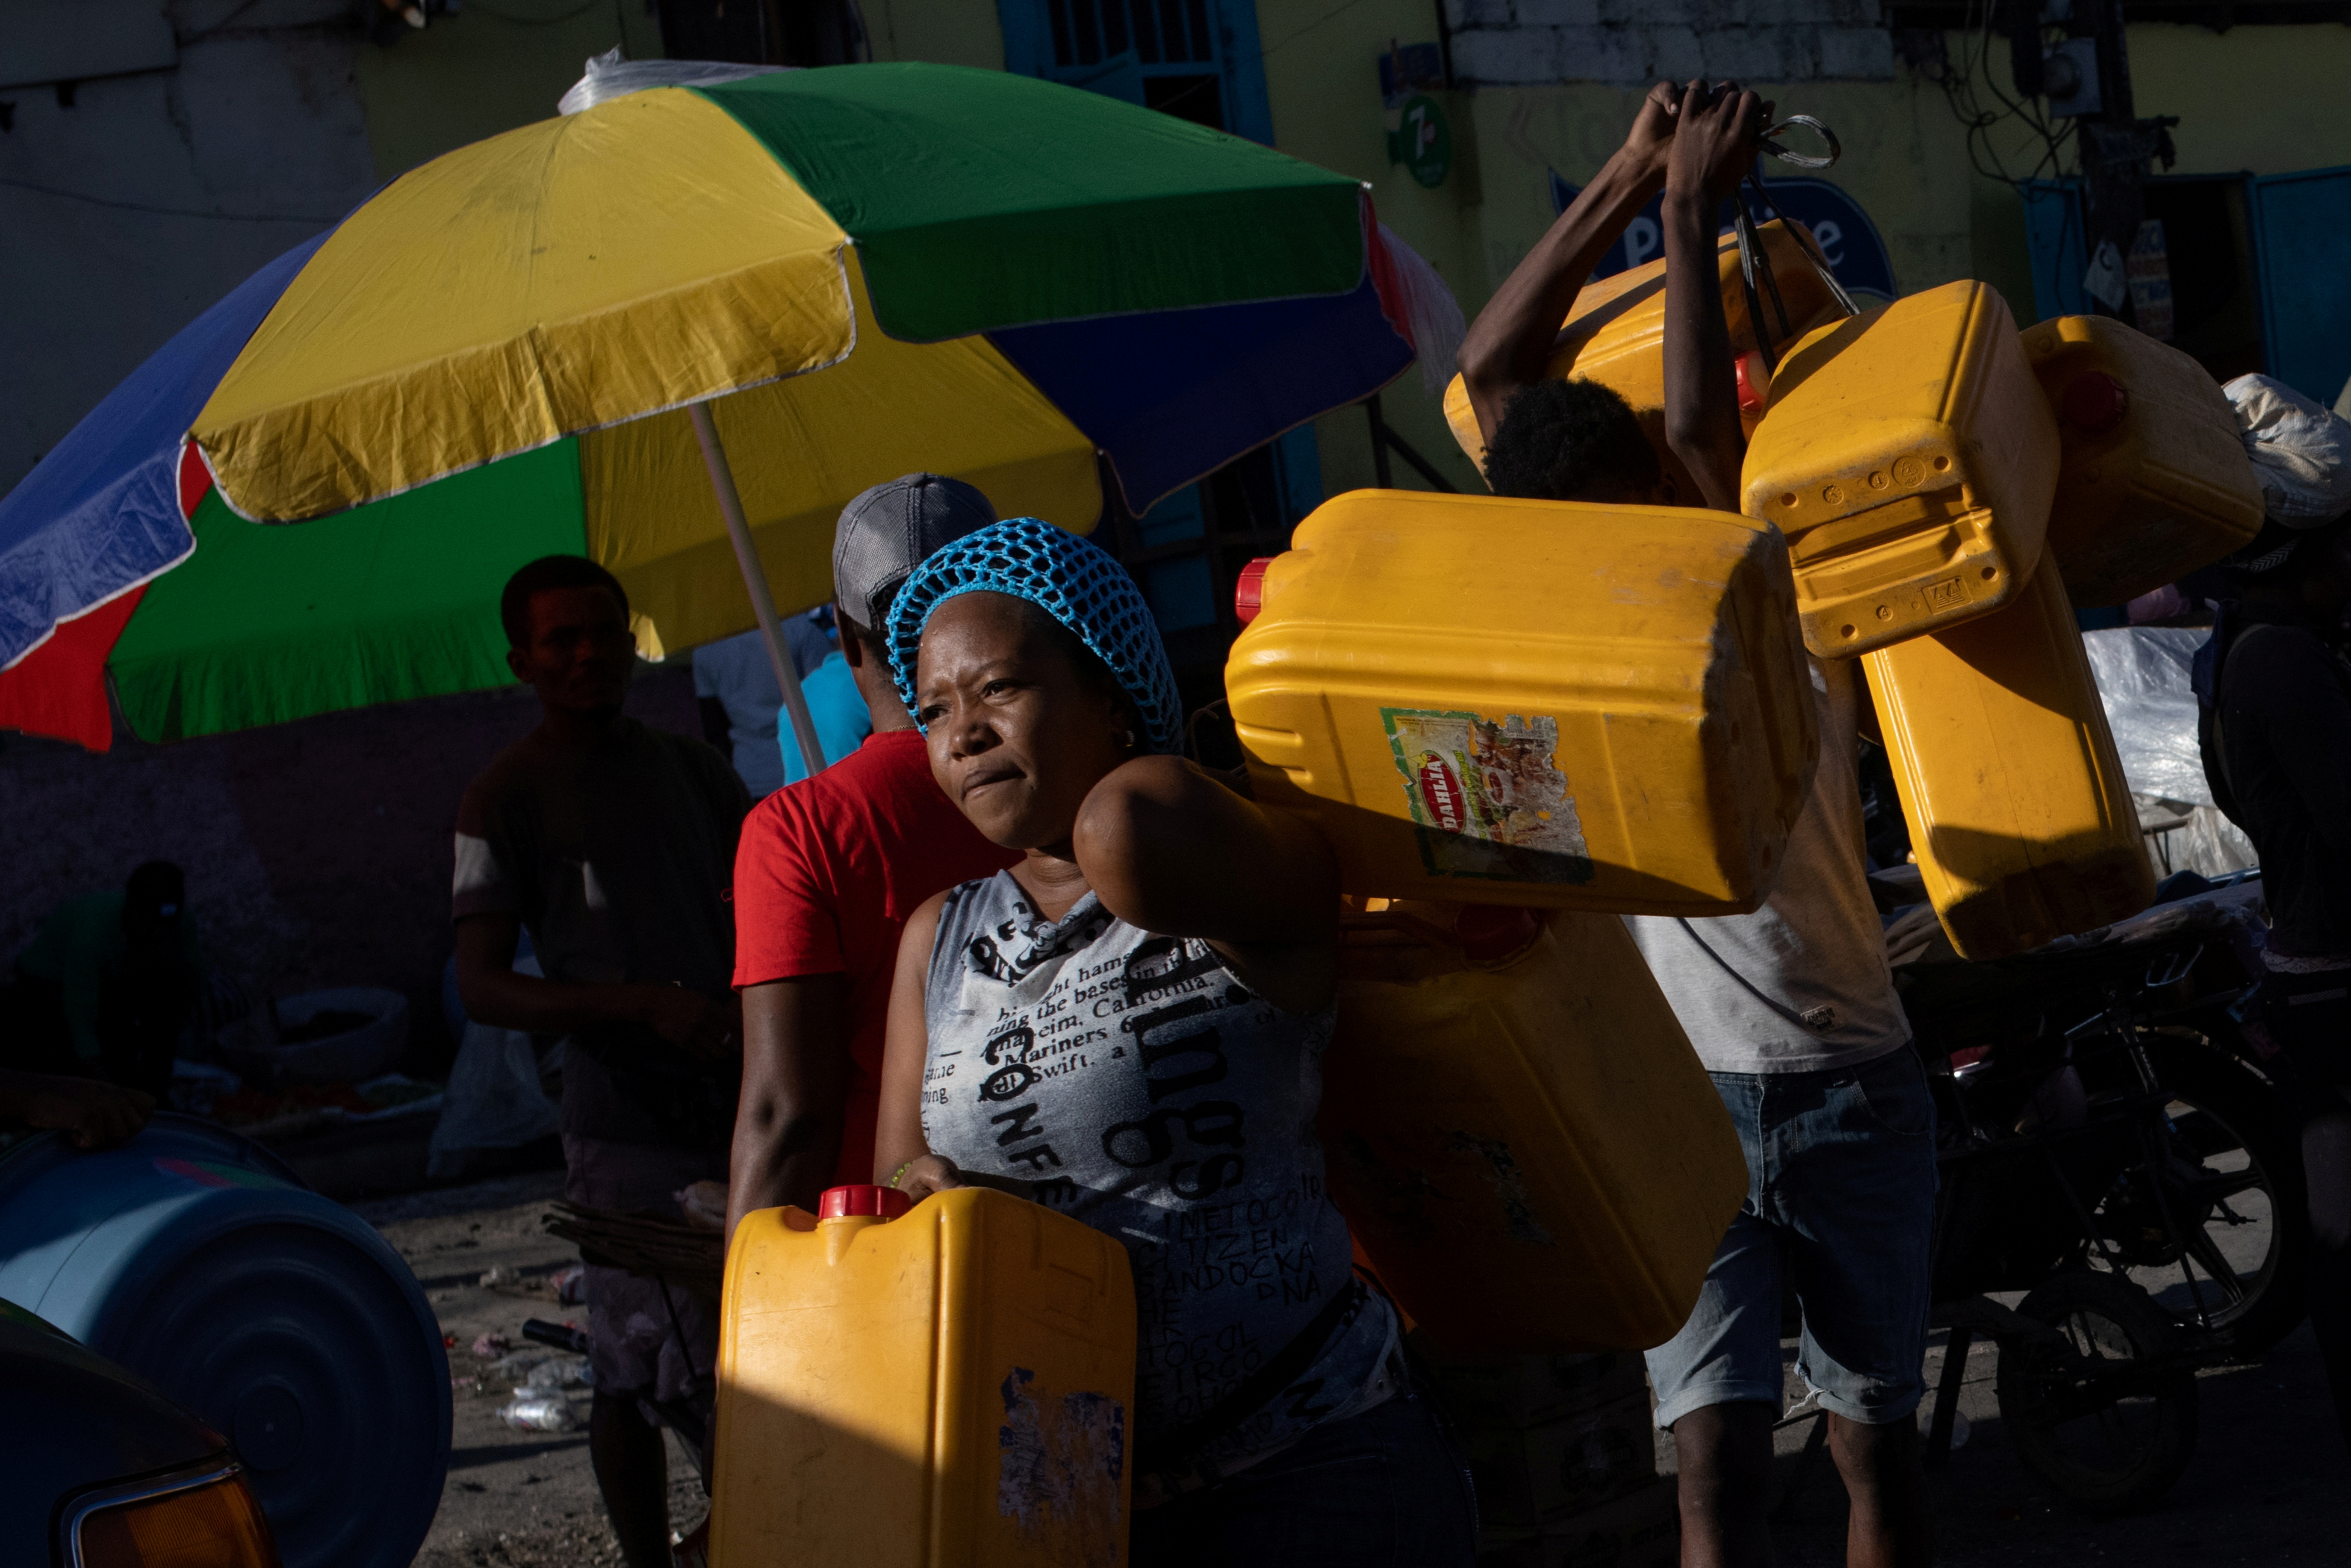 Locals carry containers, used for oil and gasoline, during fuel shortages in Port-au-Prince, Haiti October 24, 2021.  REUTERS/Adrees Latif